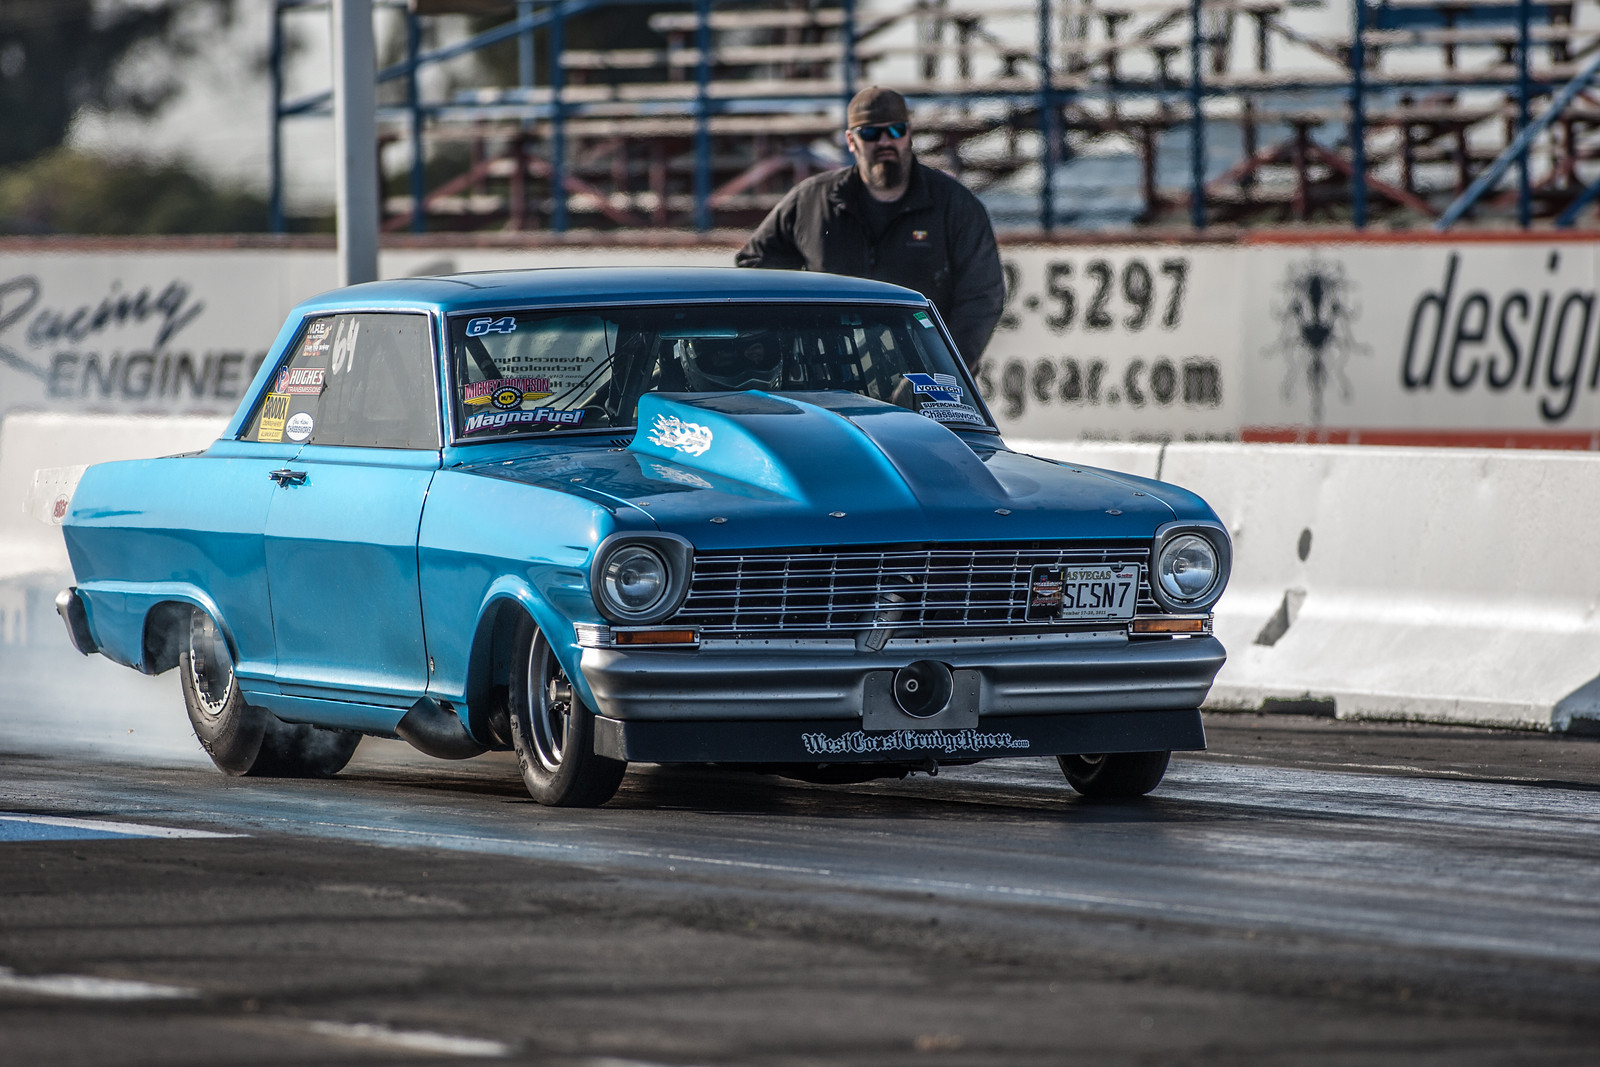 Download hd wallpapers of 131264-nhra, Drag, Racing, Race, Hot, Rod, Rods, Chevrole...